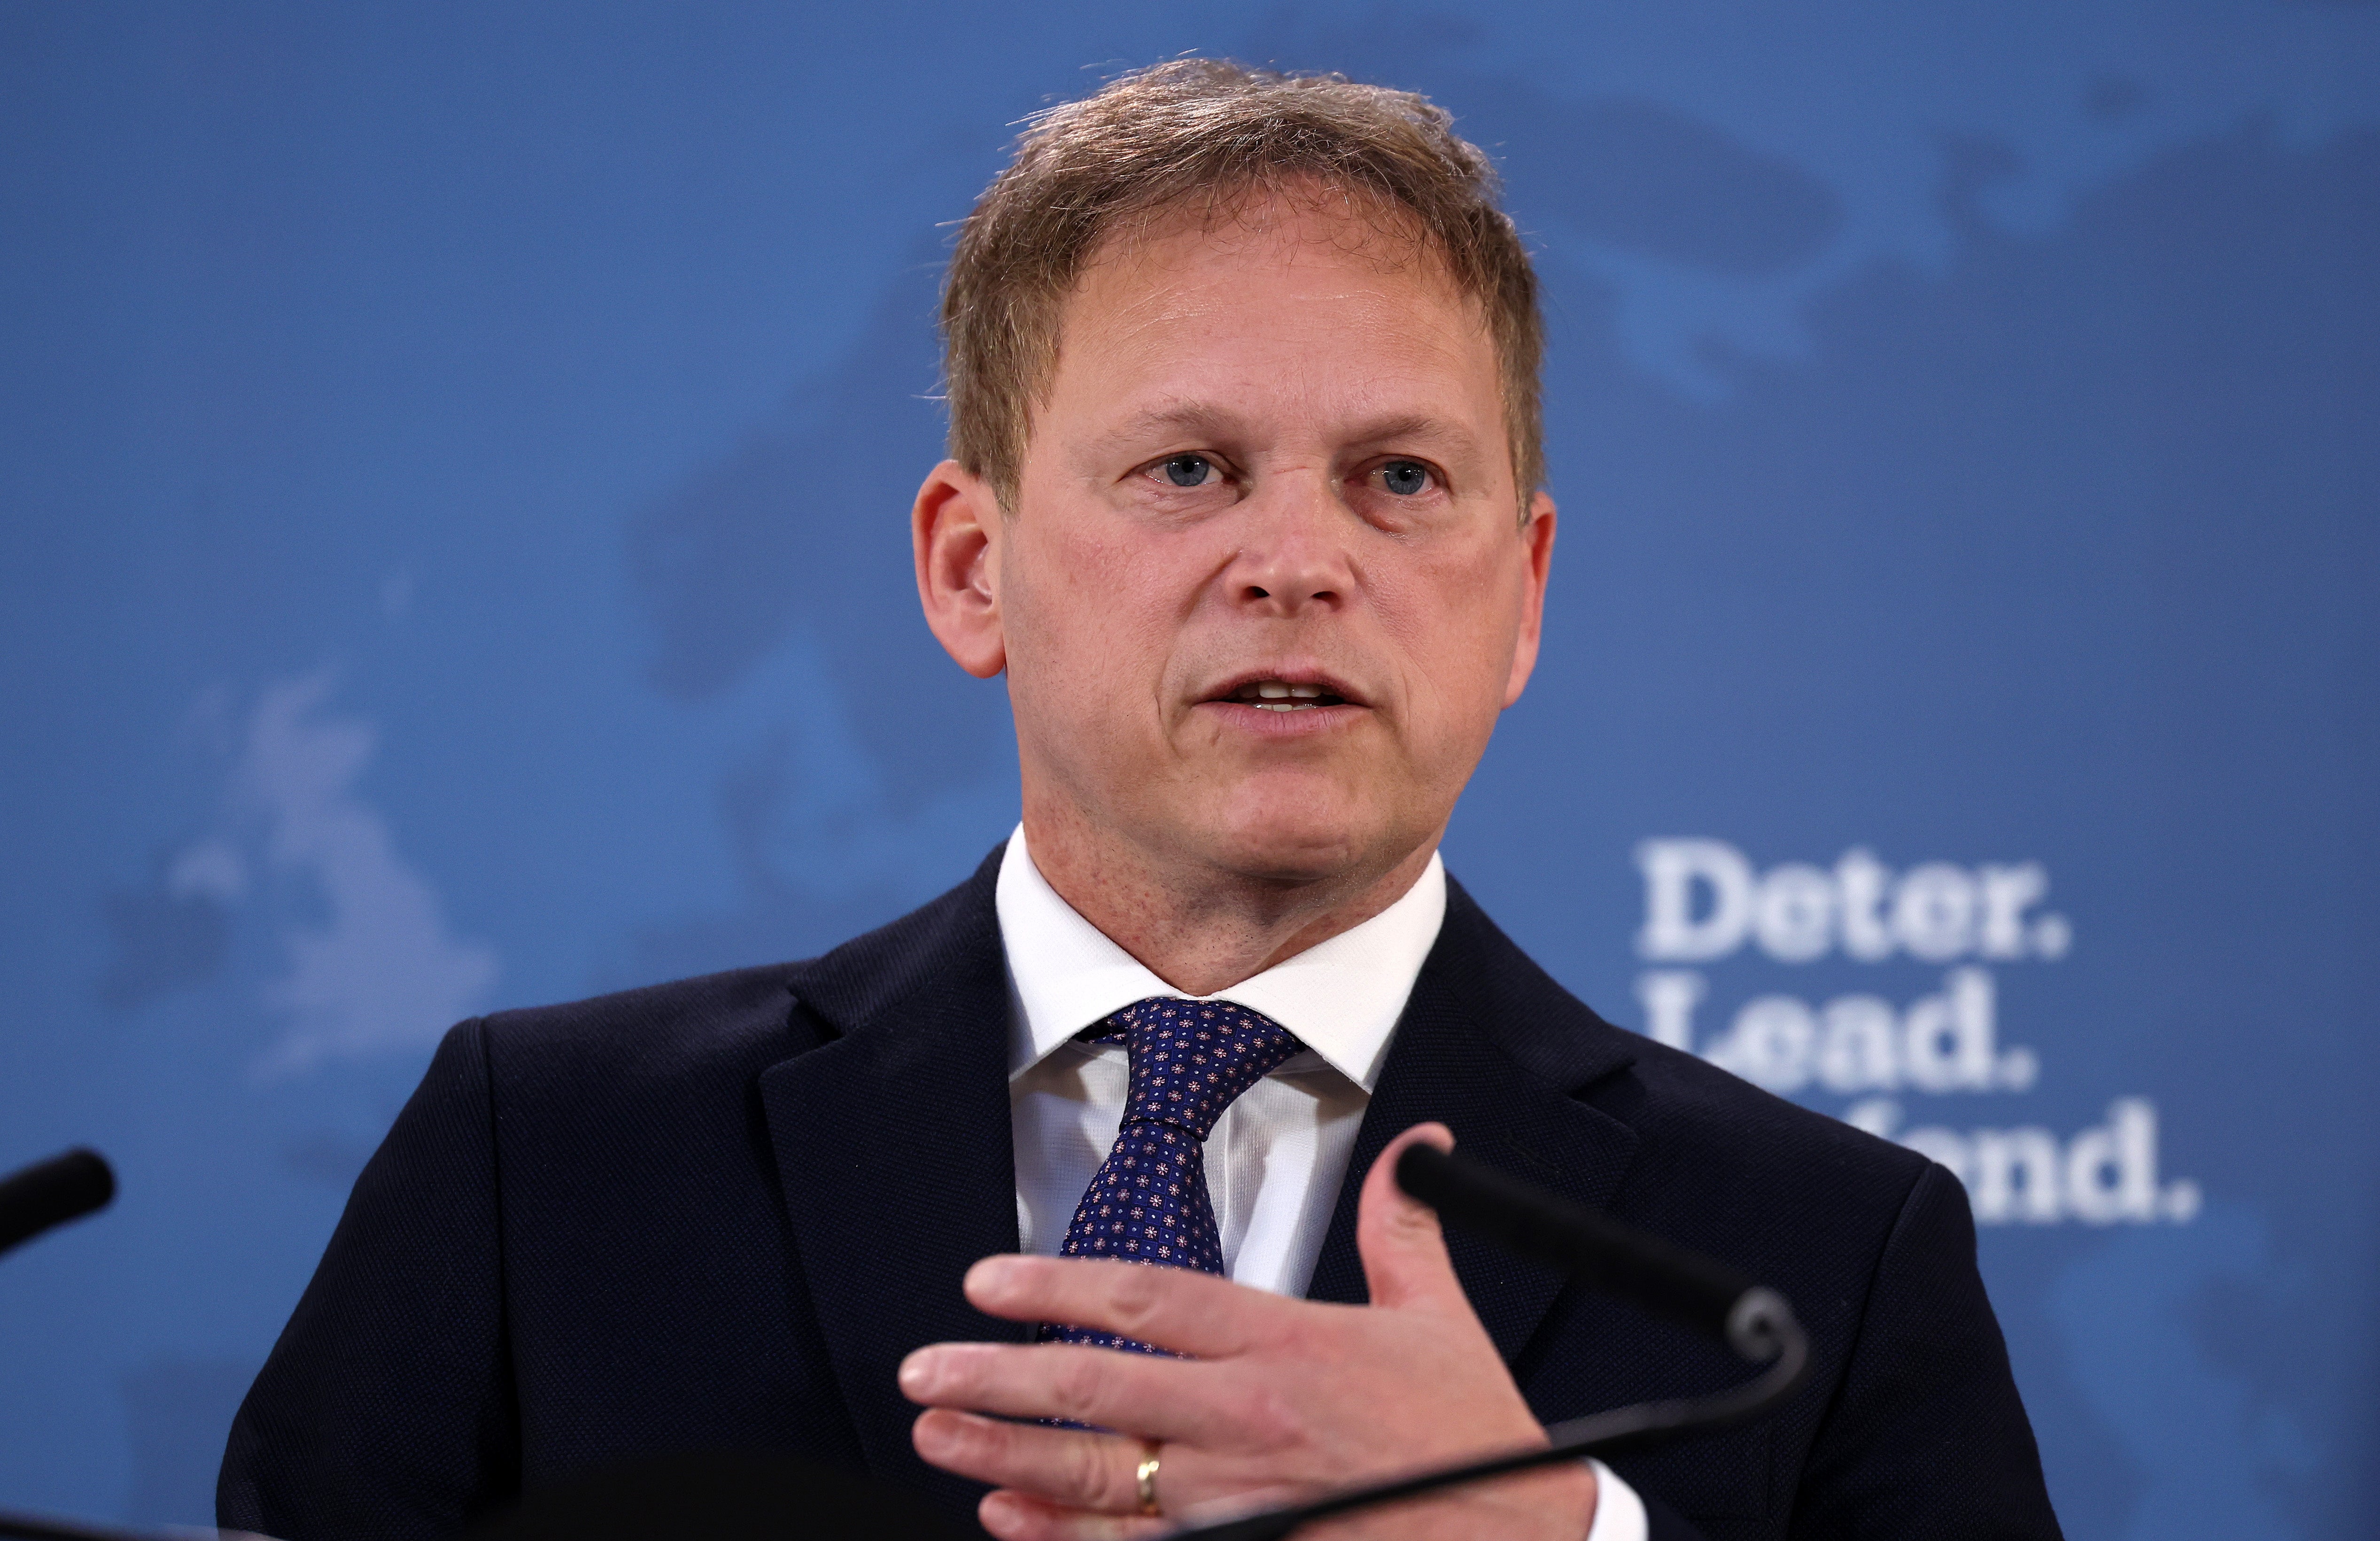 Grant Shapps delivered a speech on the UK’s air strikes in Yemen